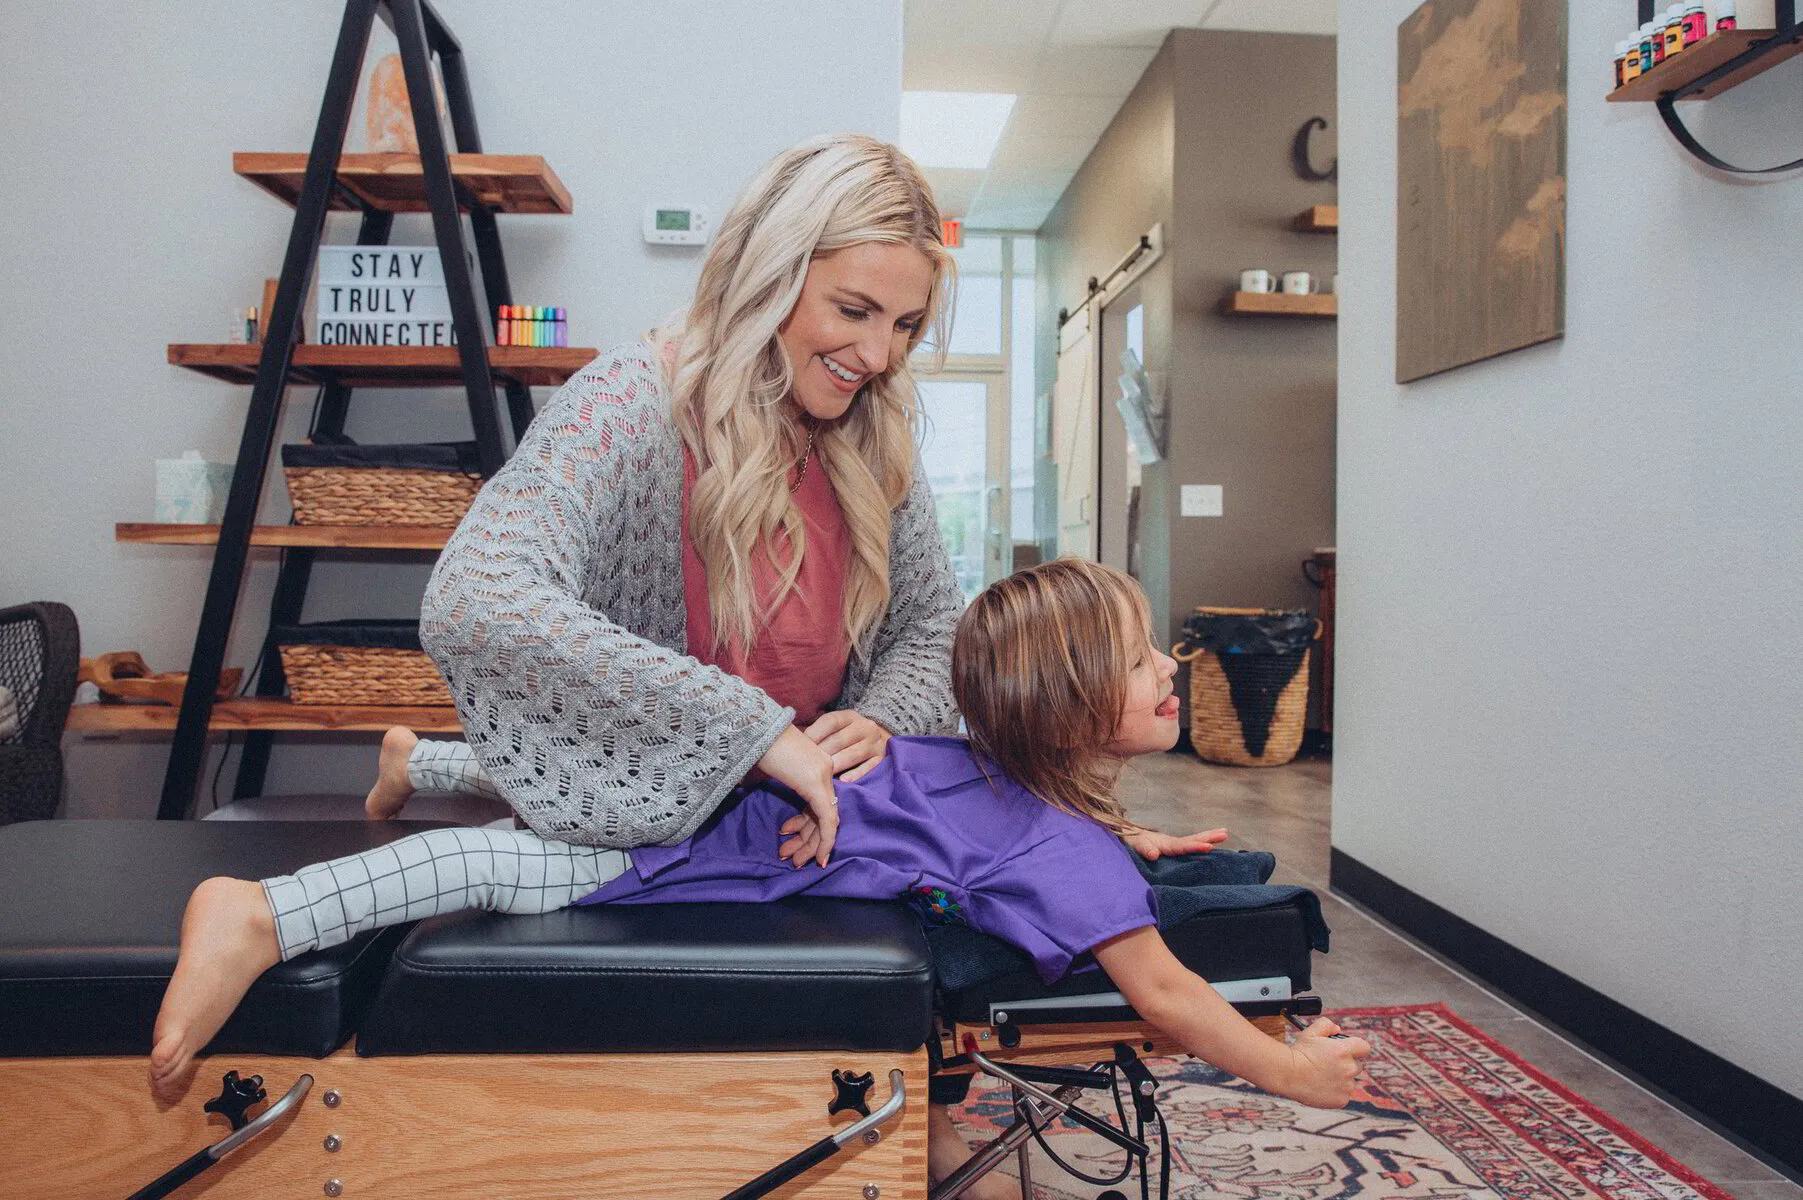 Dr. Morgan gently prepares a young patient for a chiropractic adjustment, showcasing her child-friendly approach at Truly Chiropractic